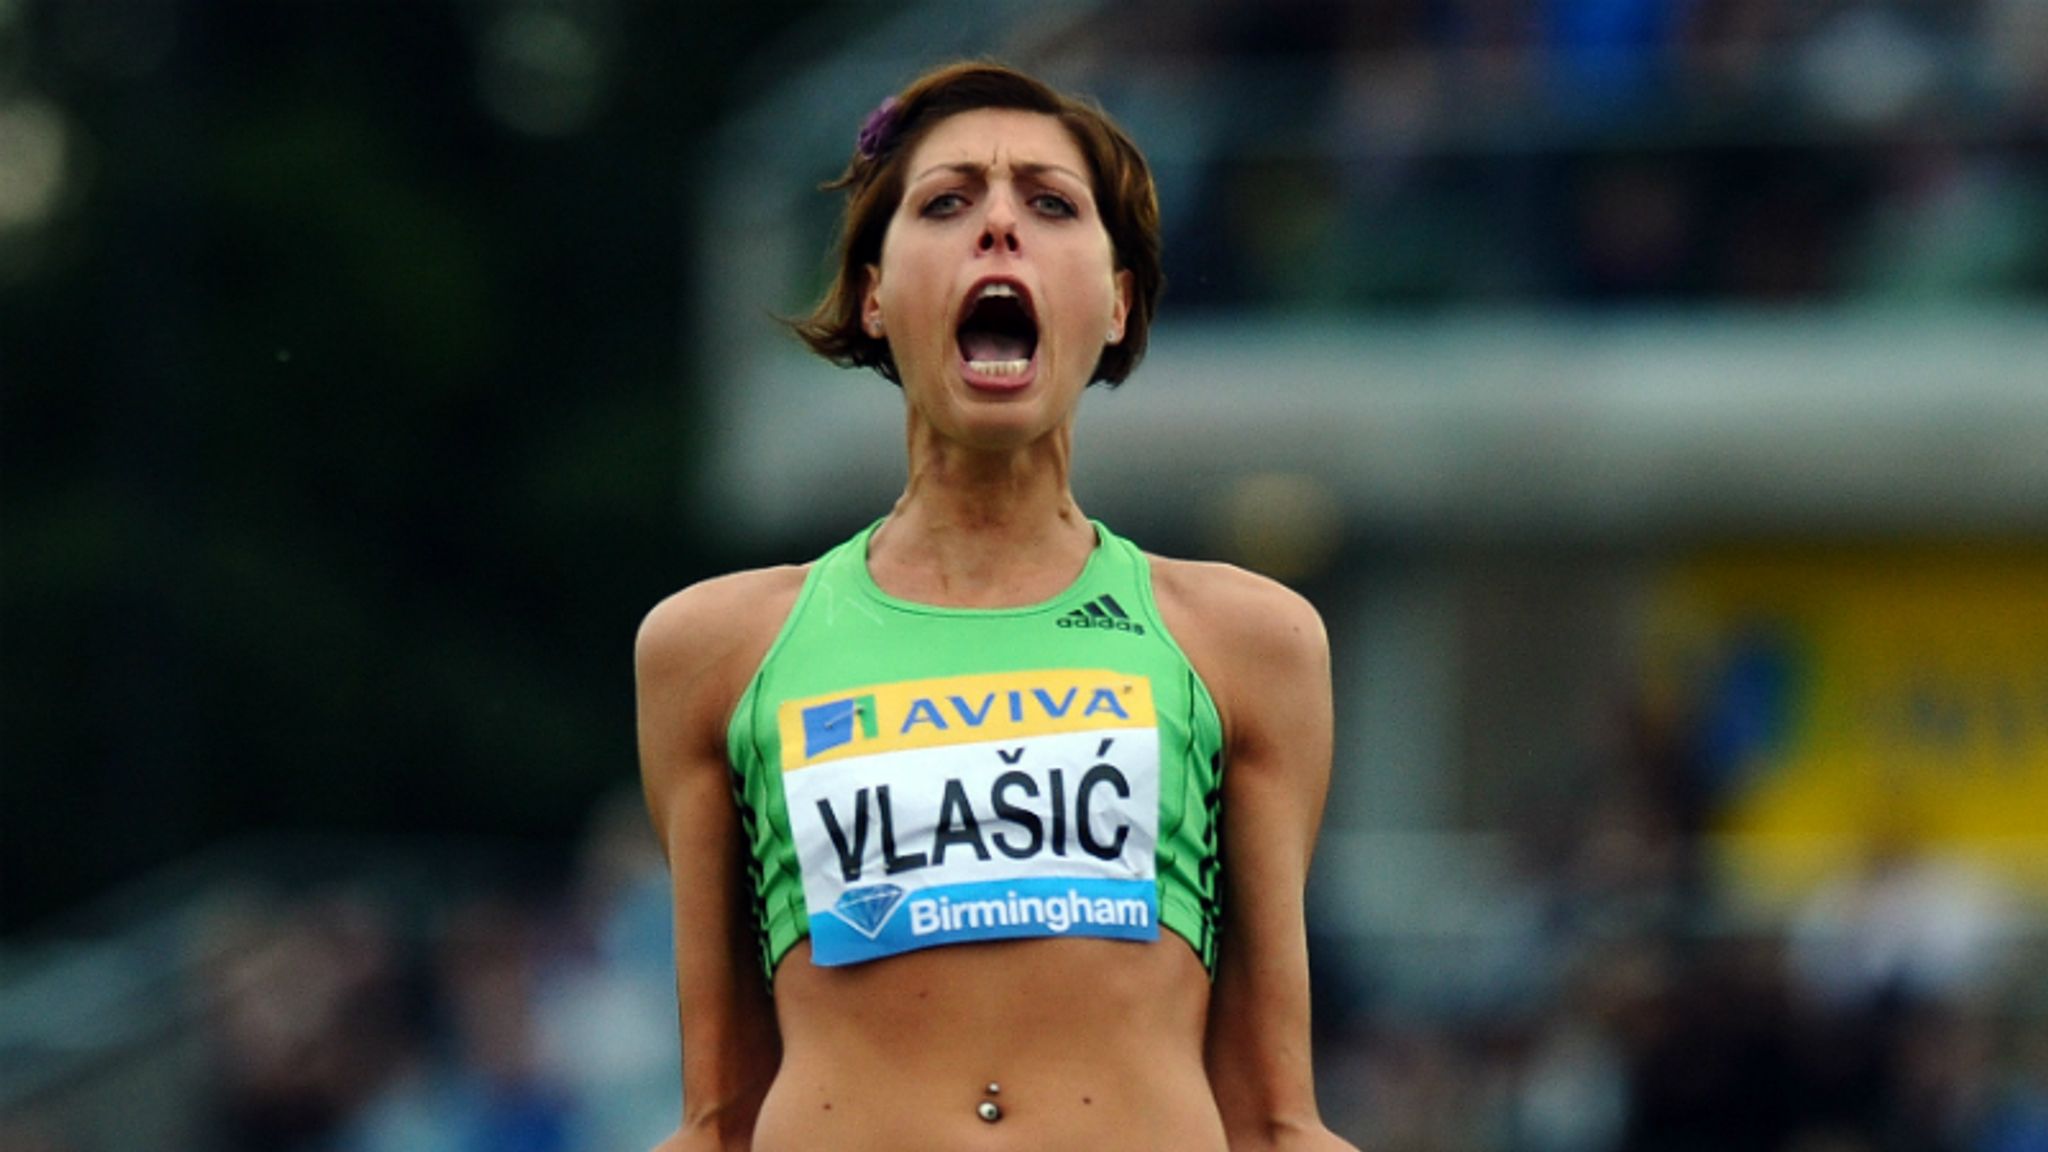 Injured Vlasic to defend title, Olympics News